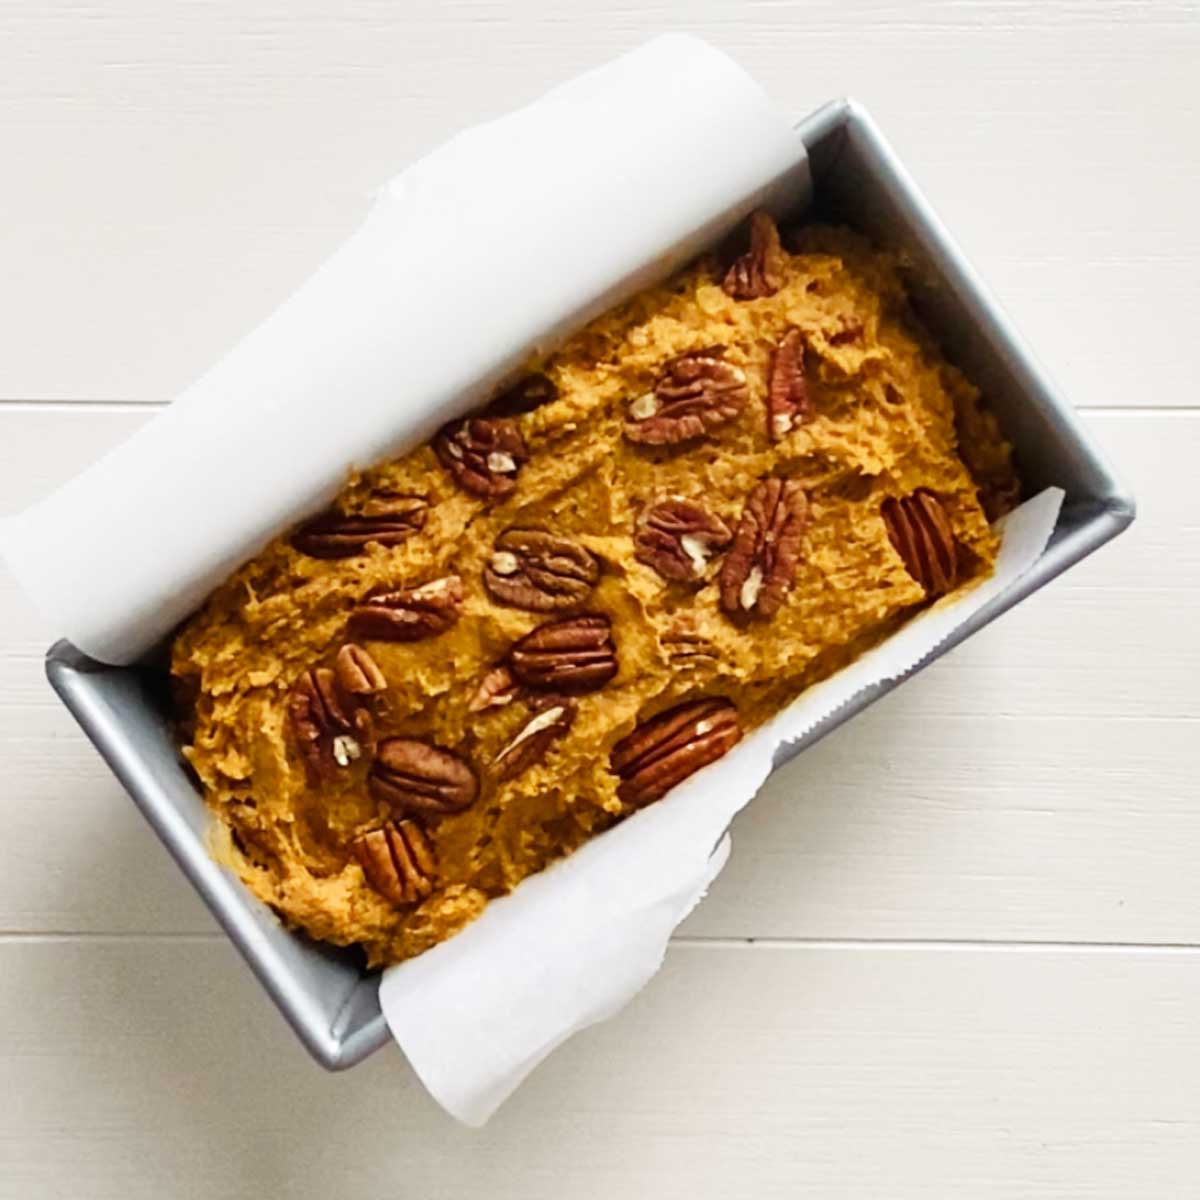 Molasses Pumpkin Bread With Pecan Nuts (No Eggs Or Dairy Required!) - topping variations